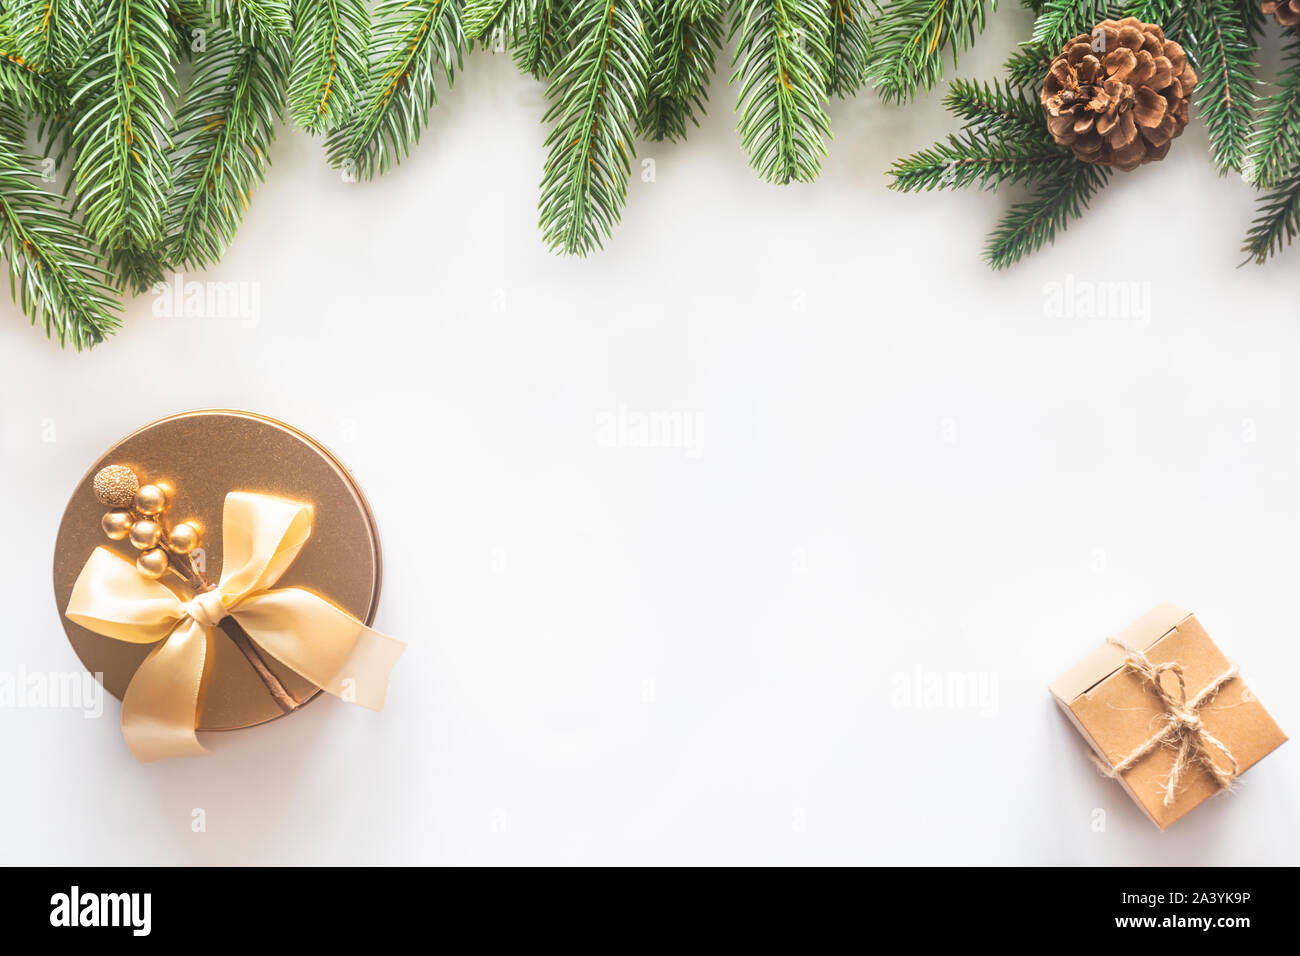 Holiday Christmas card background with festive decoration ball, stars, snowflakes, gift box, pine cones on a white background from Flat lay, top view. Stock Photo